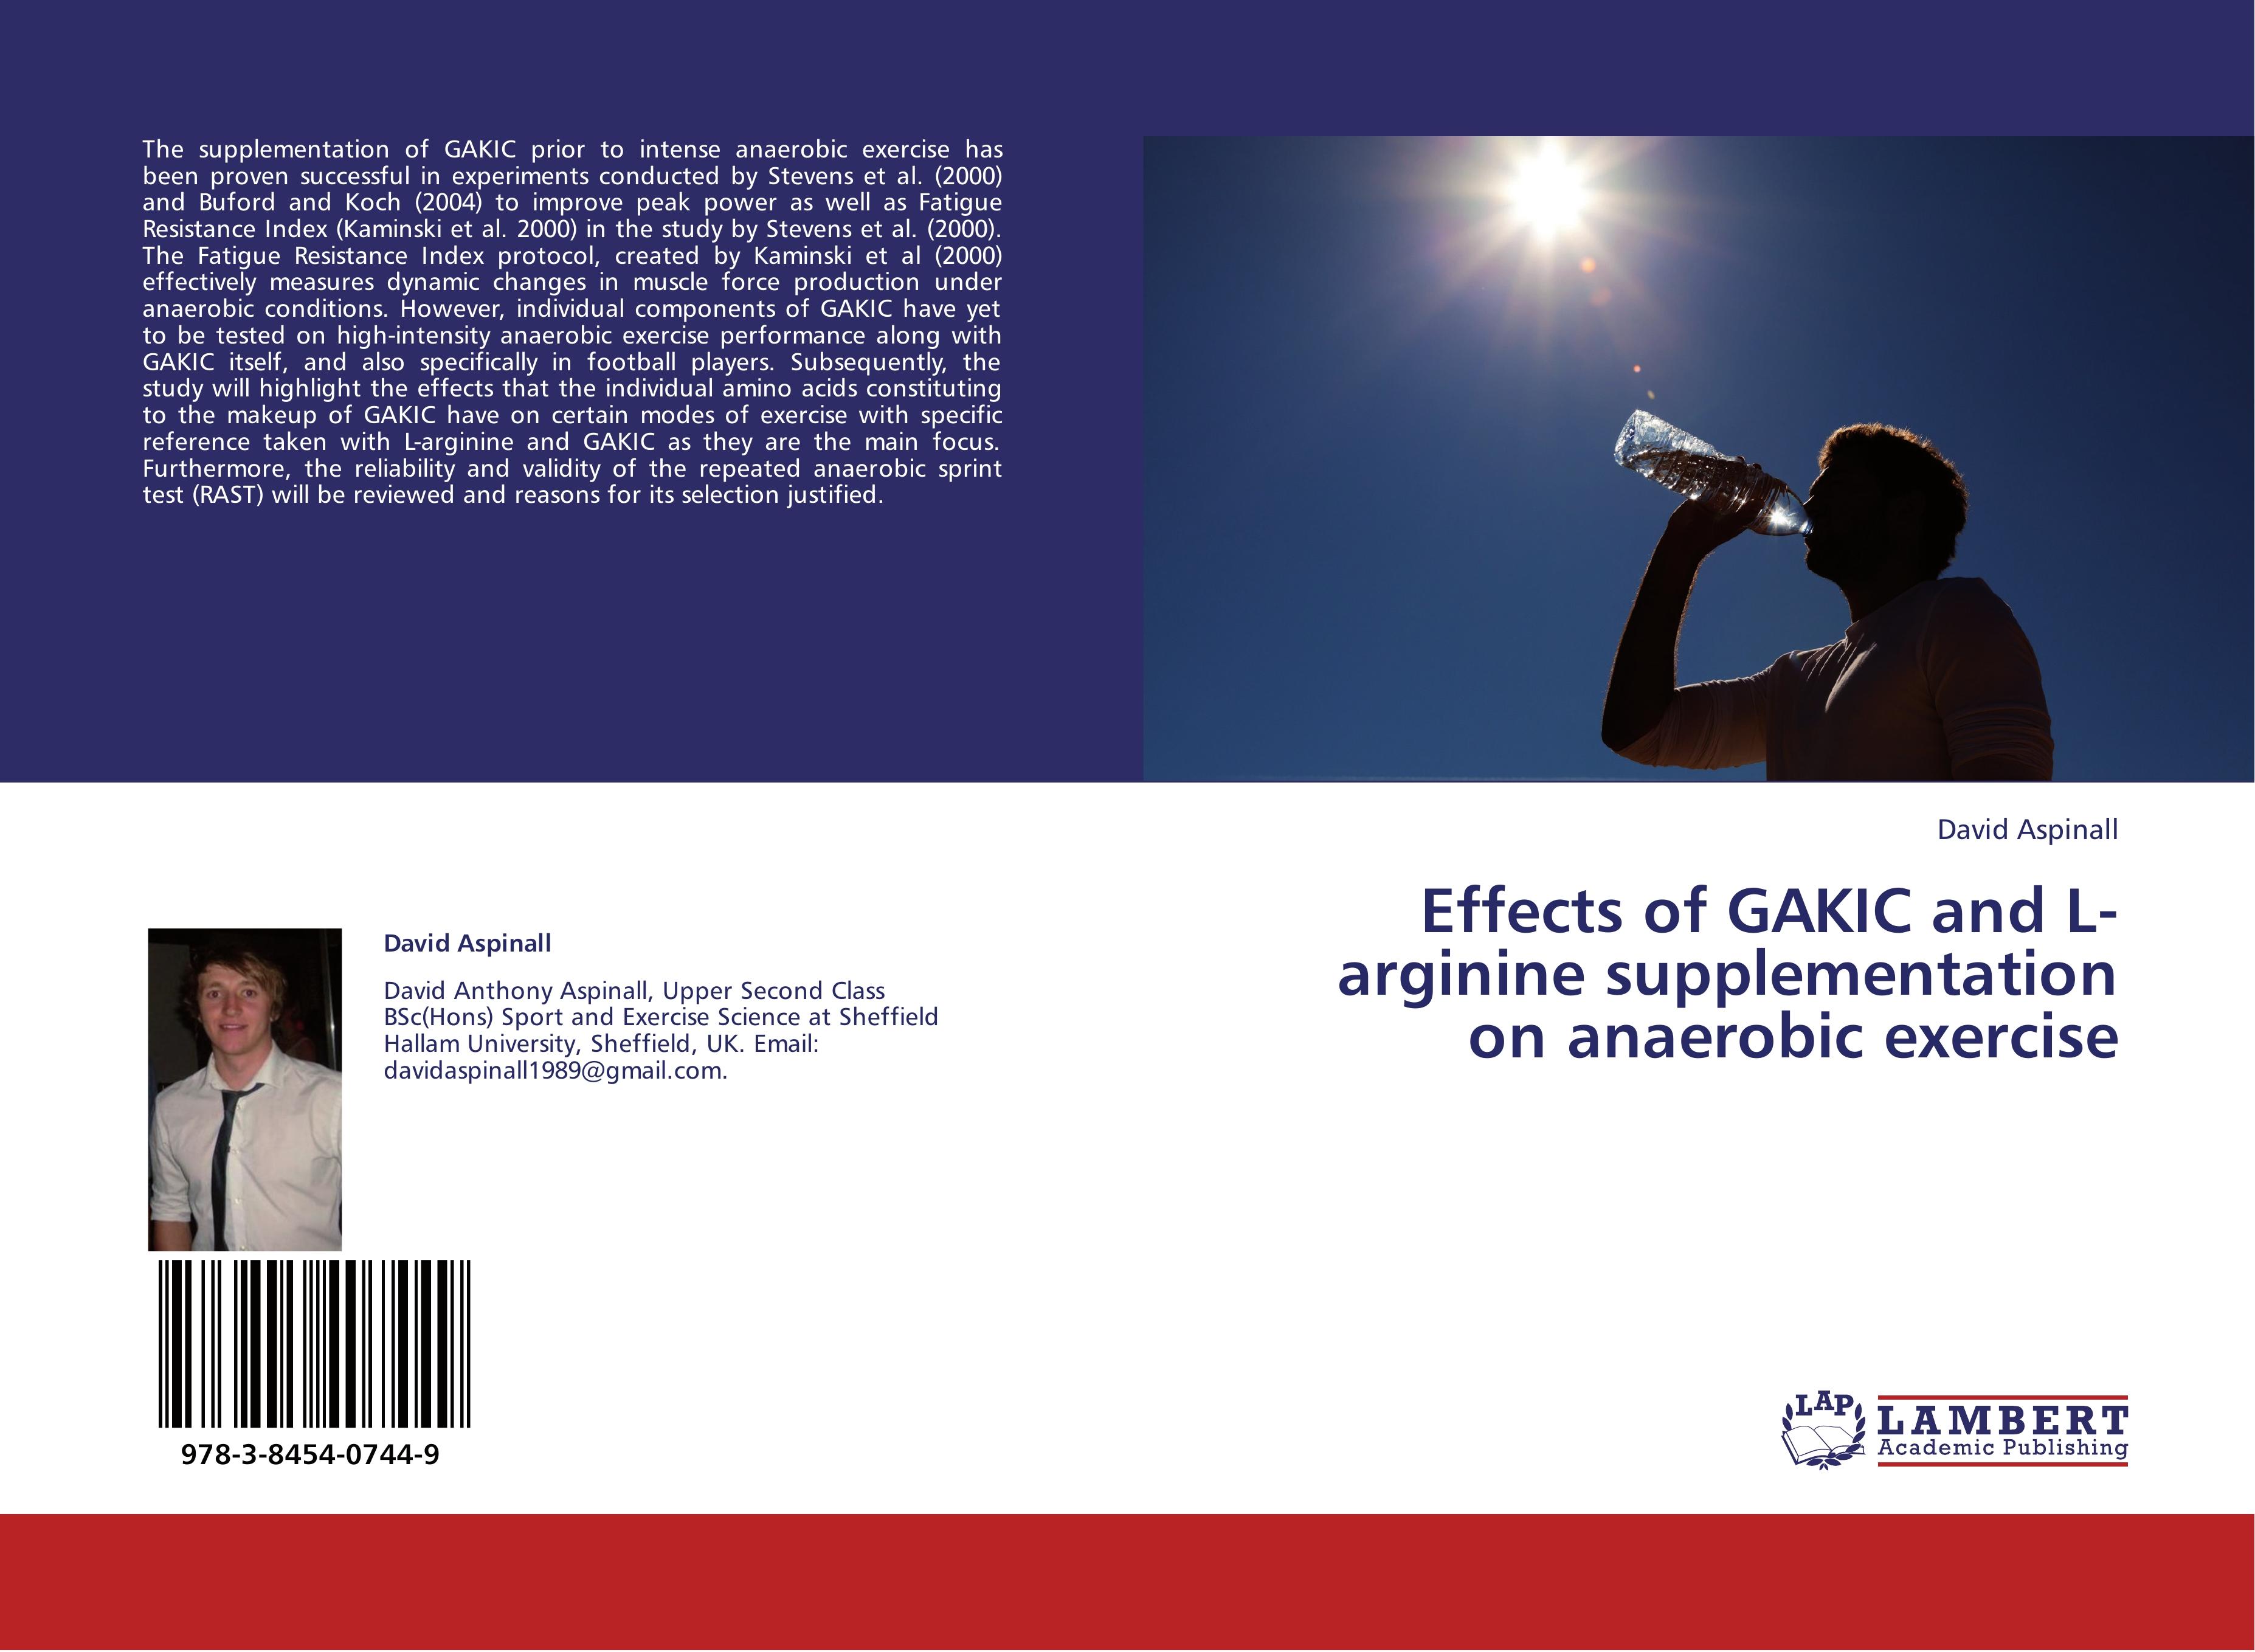 Effects of GAKIC and L-arginine supplementation on anaerobic exercise - David Aspinall